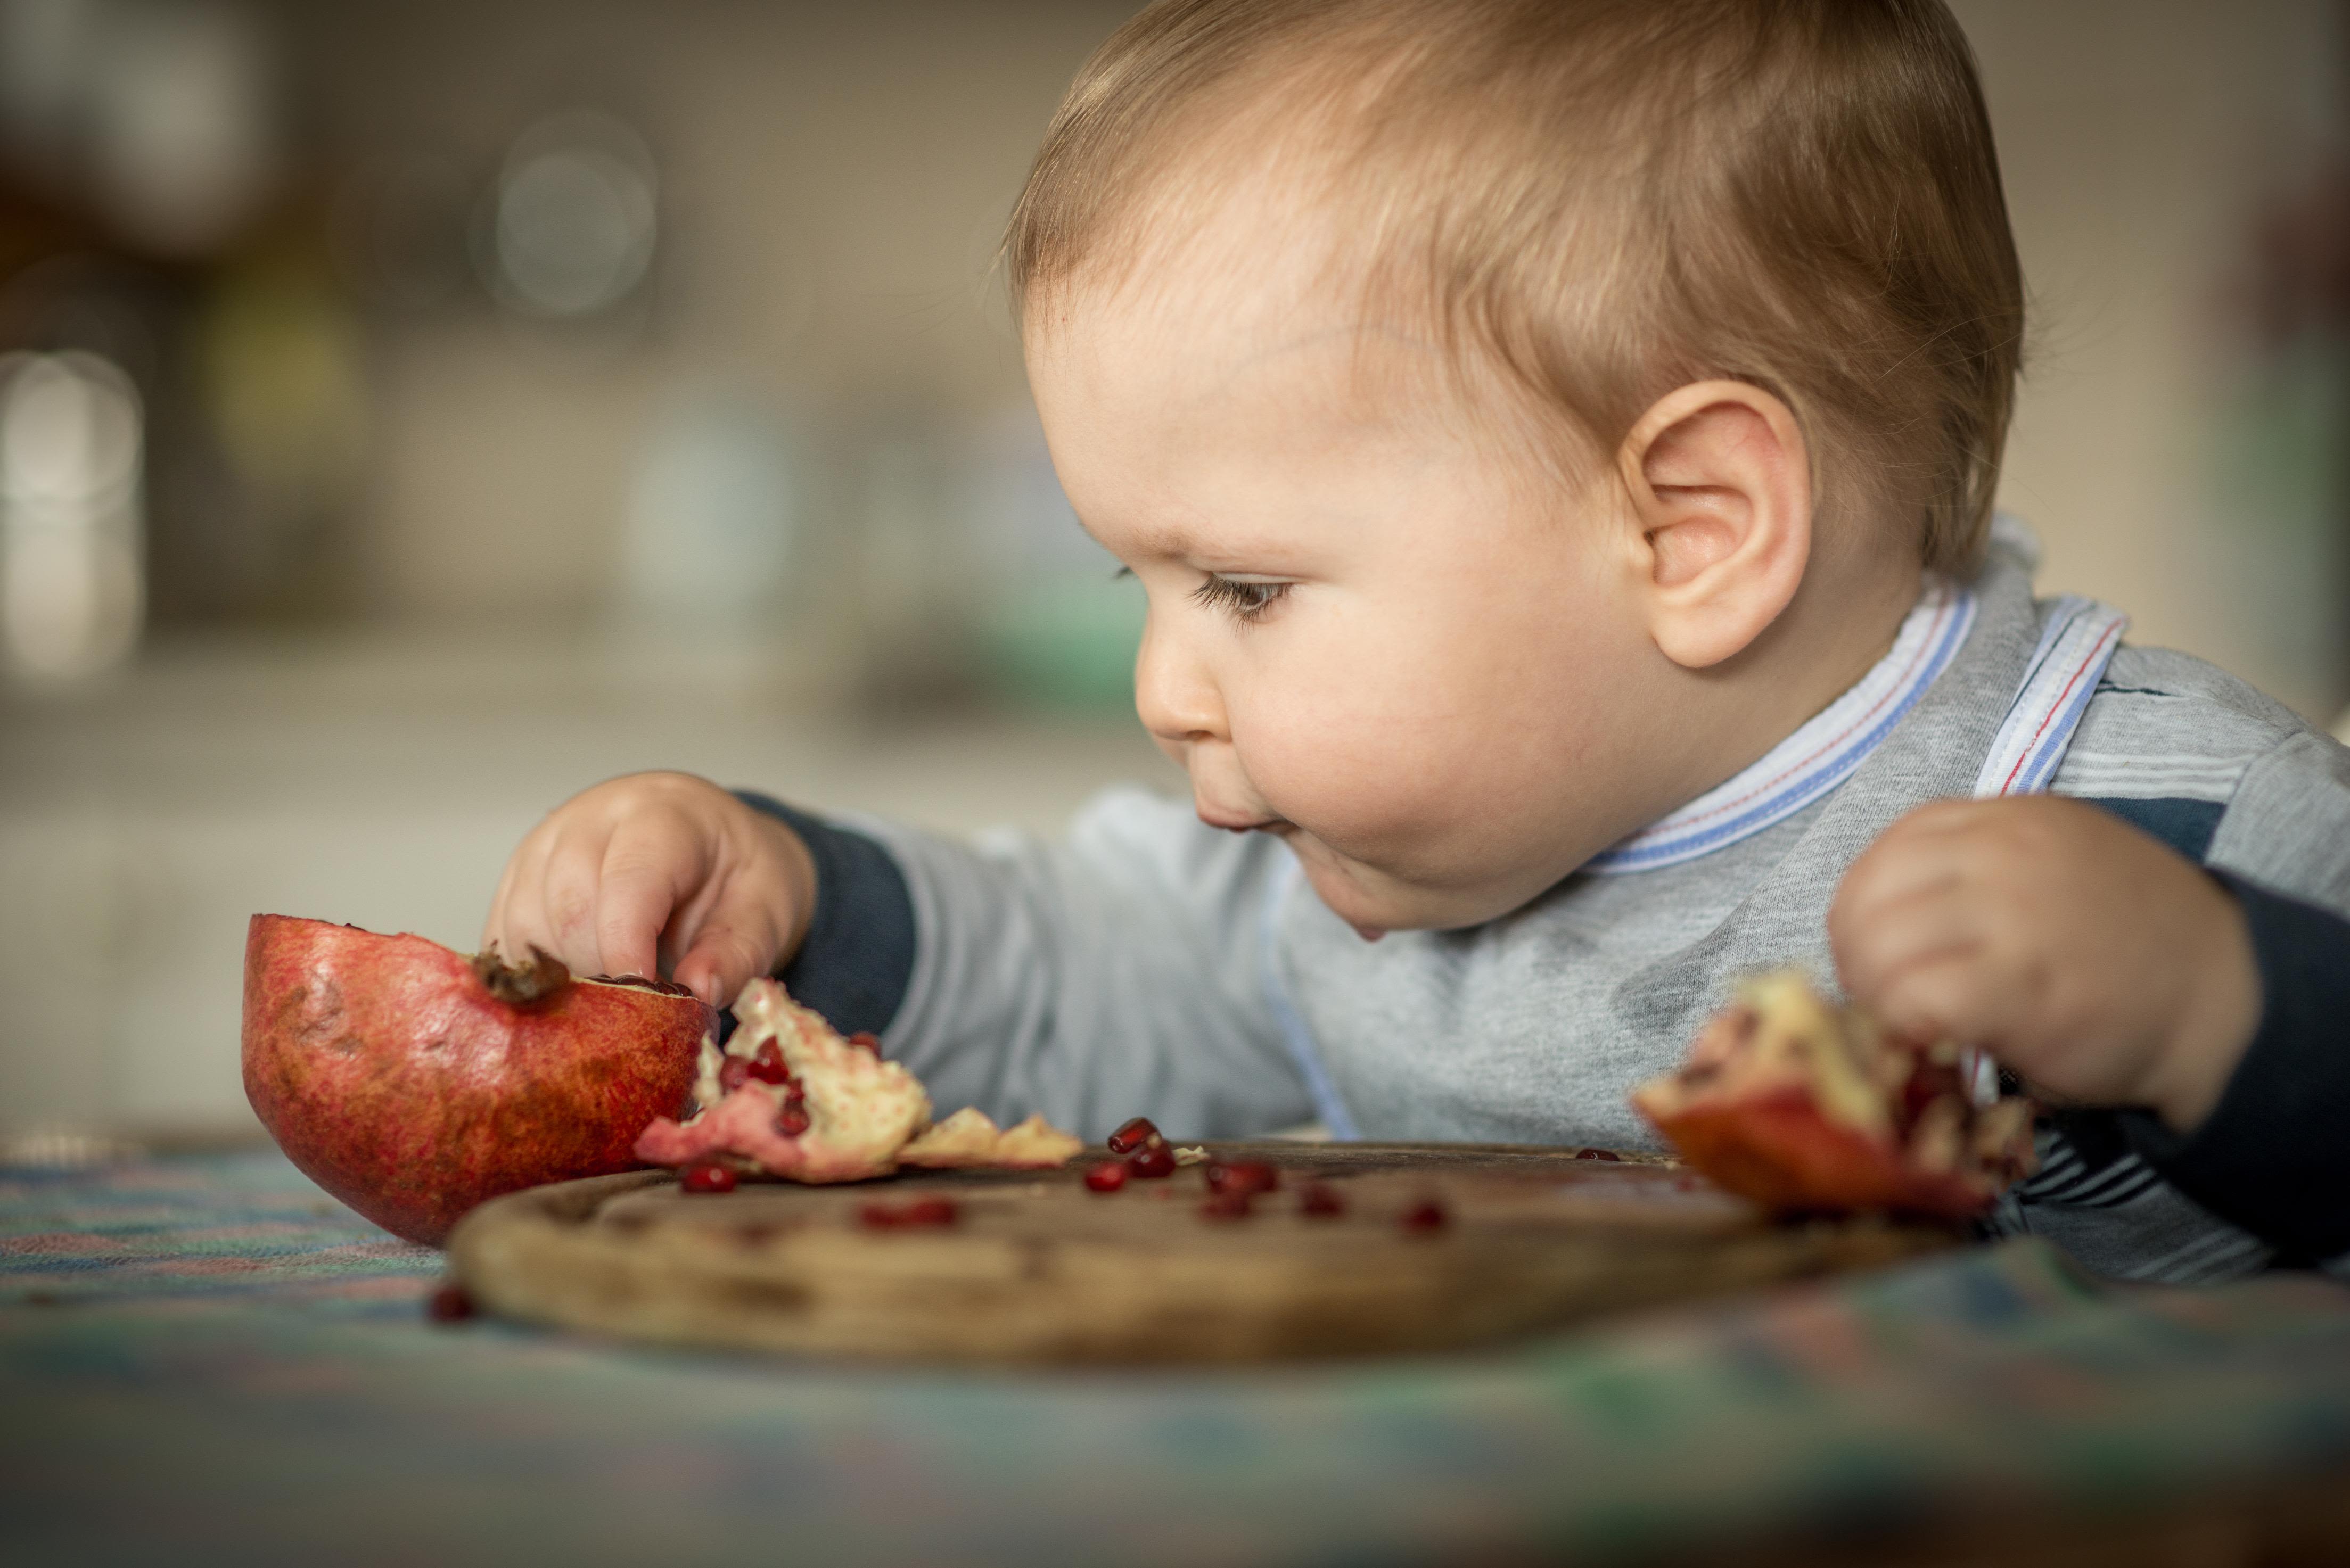 Myths and facts about heavy metals in baby food - Children's National